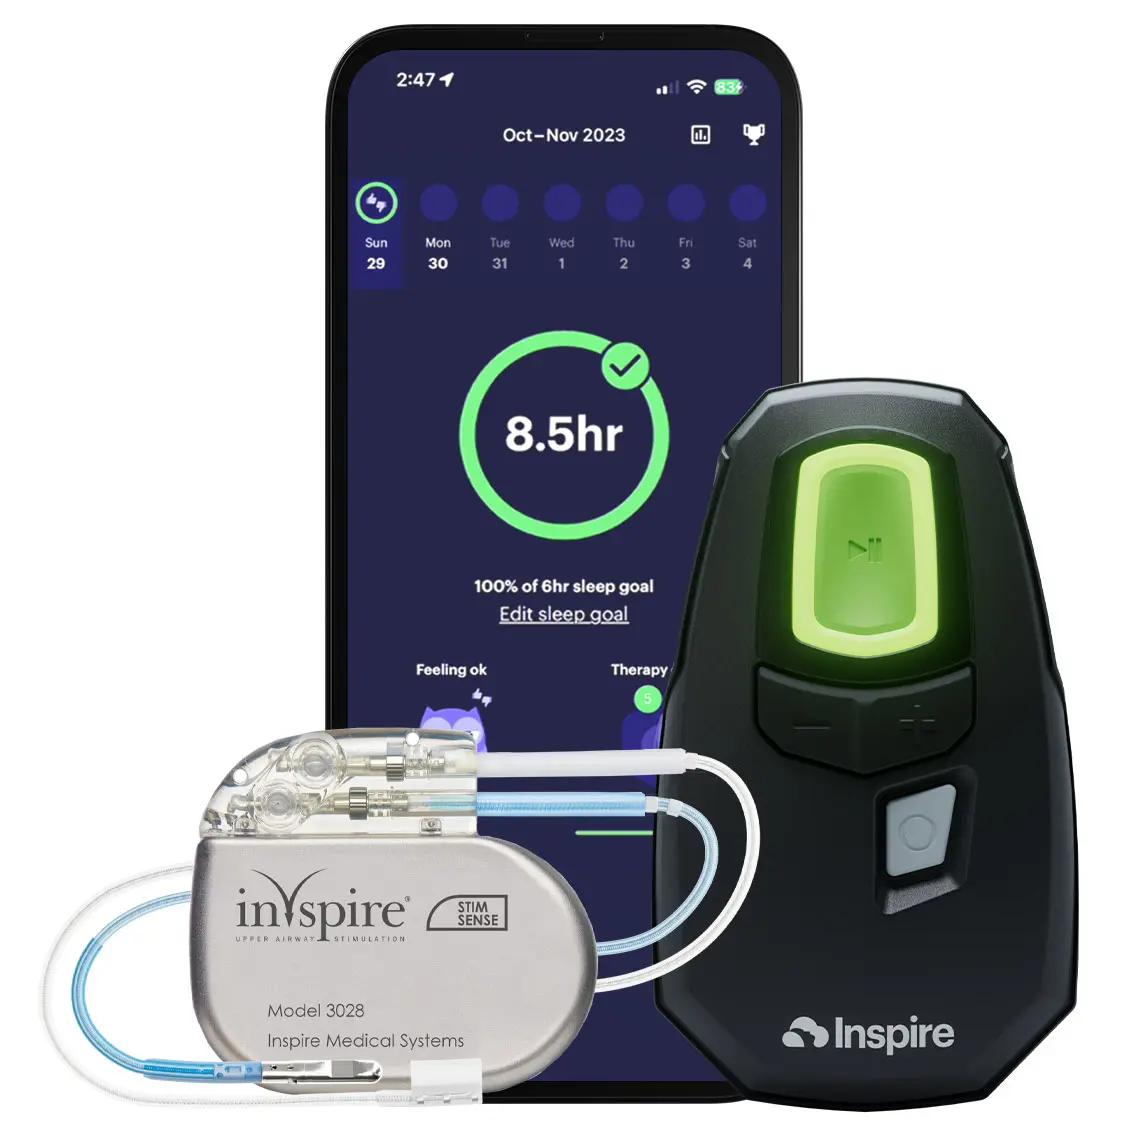 Image shows a smart phone, inspire therapy remote, and inspire therapy implant